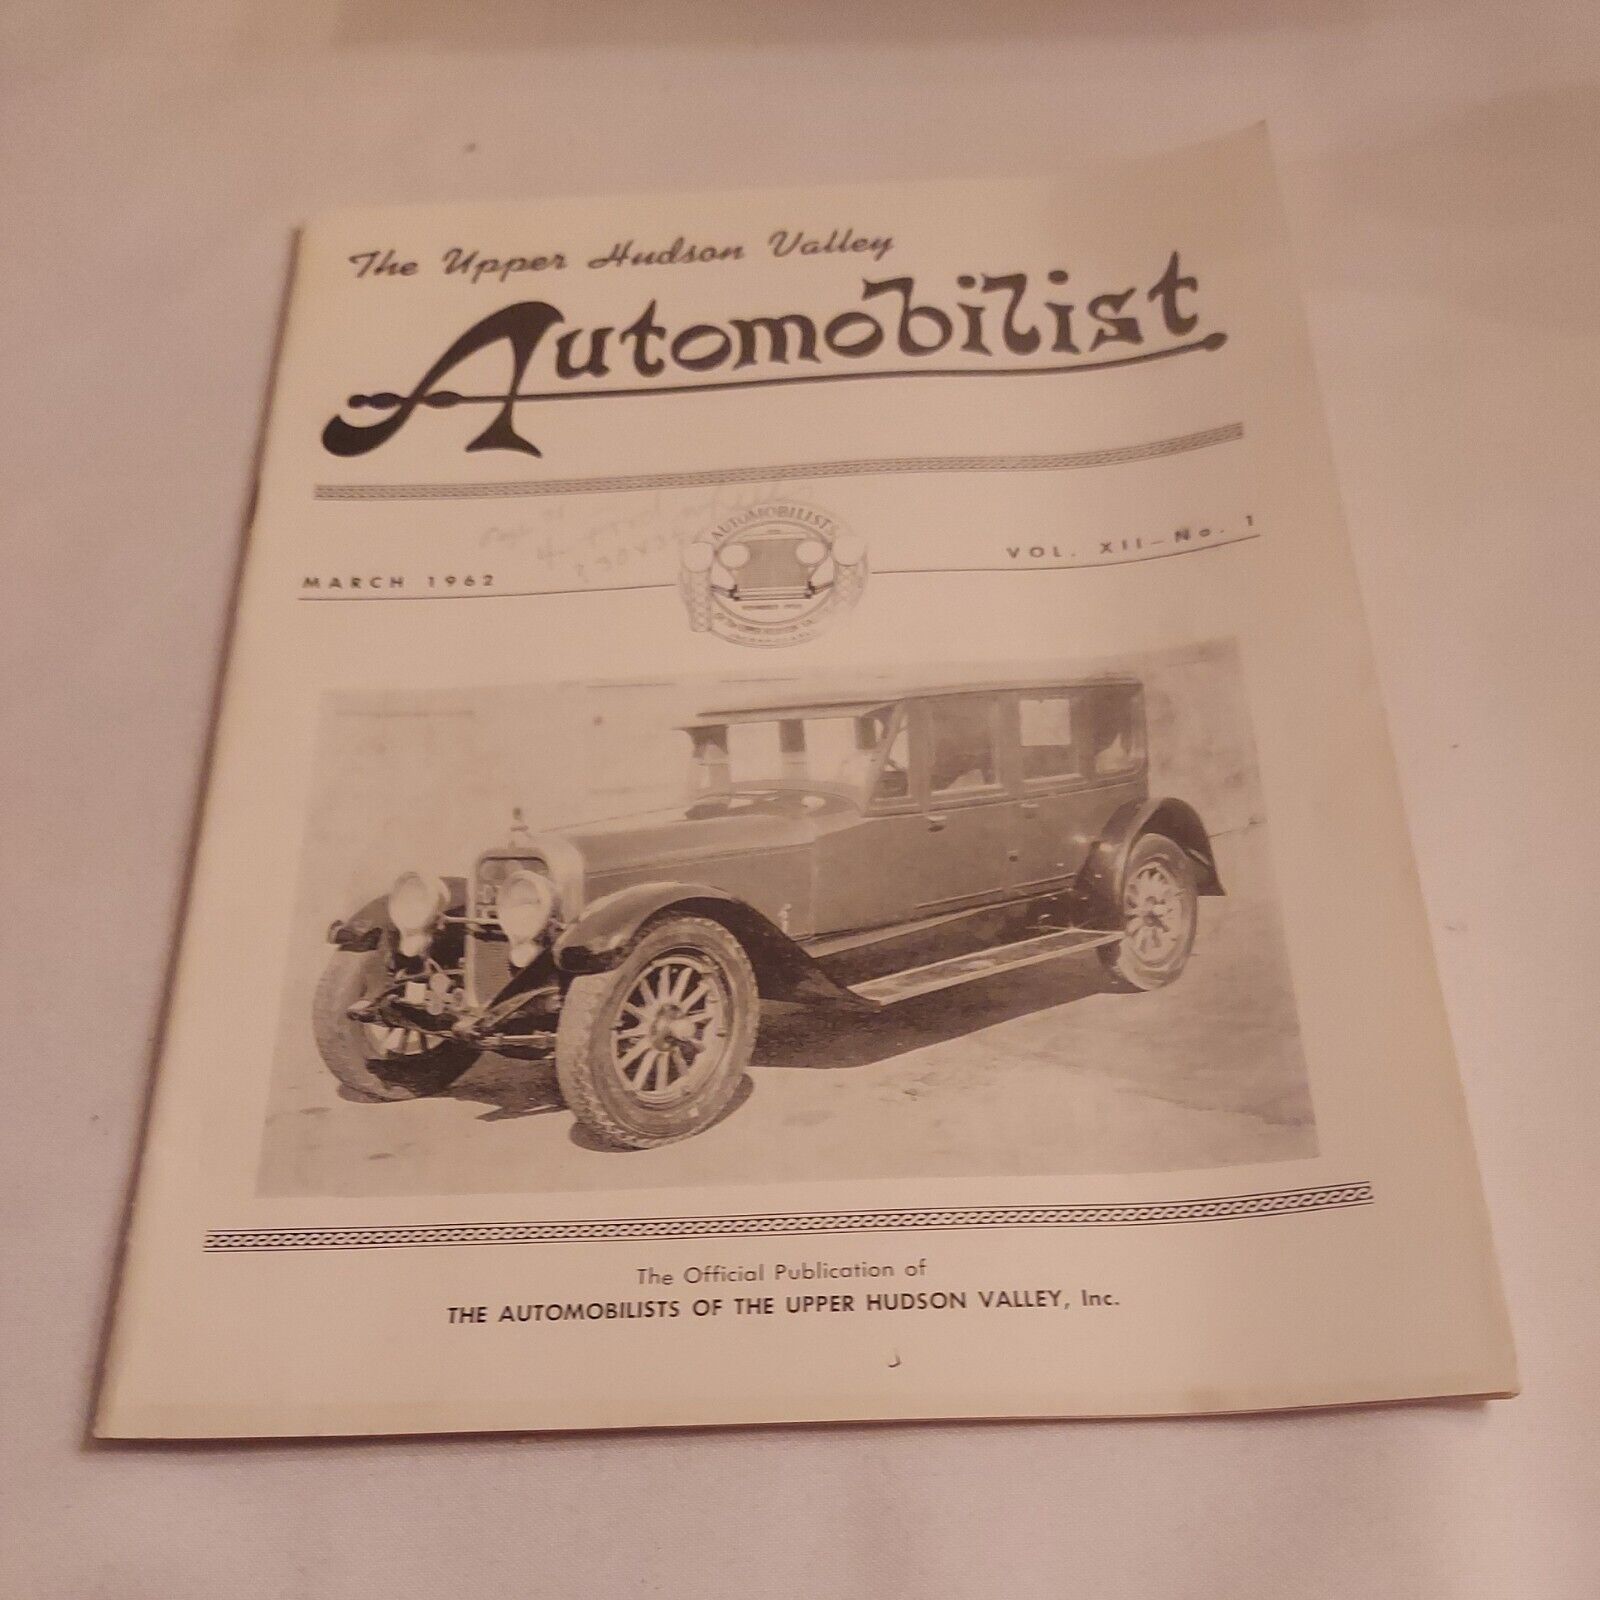 1962 March, The Automobilist Club Official Publication of Upper Hudson Valley